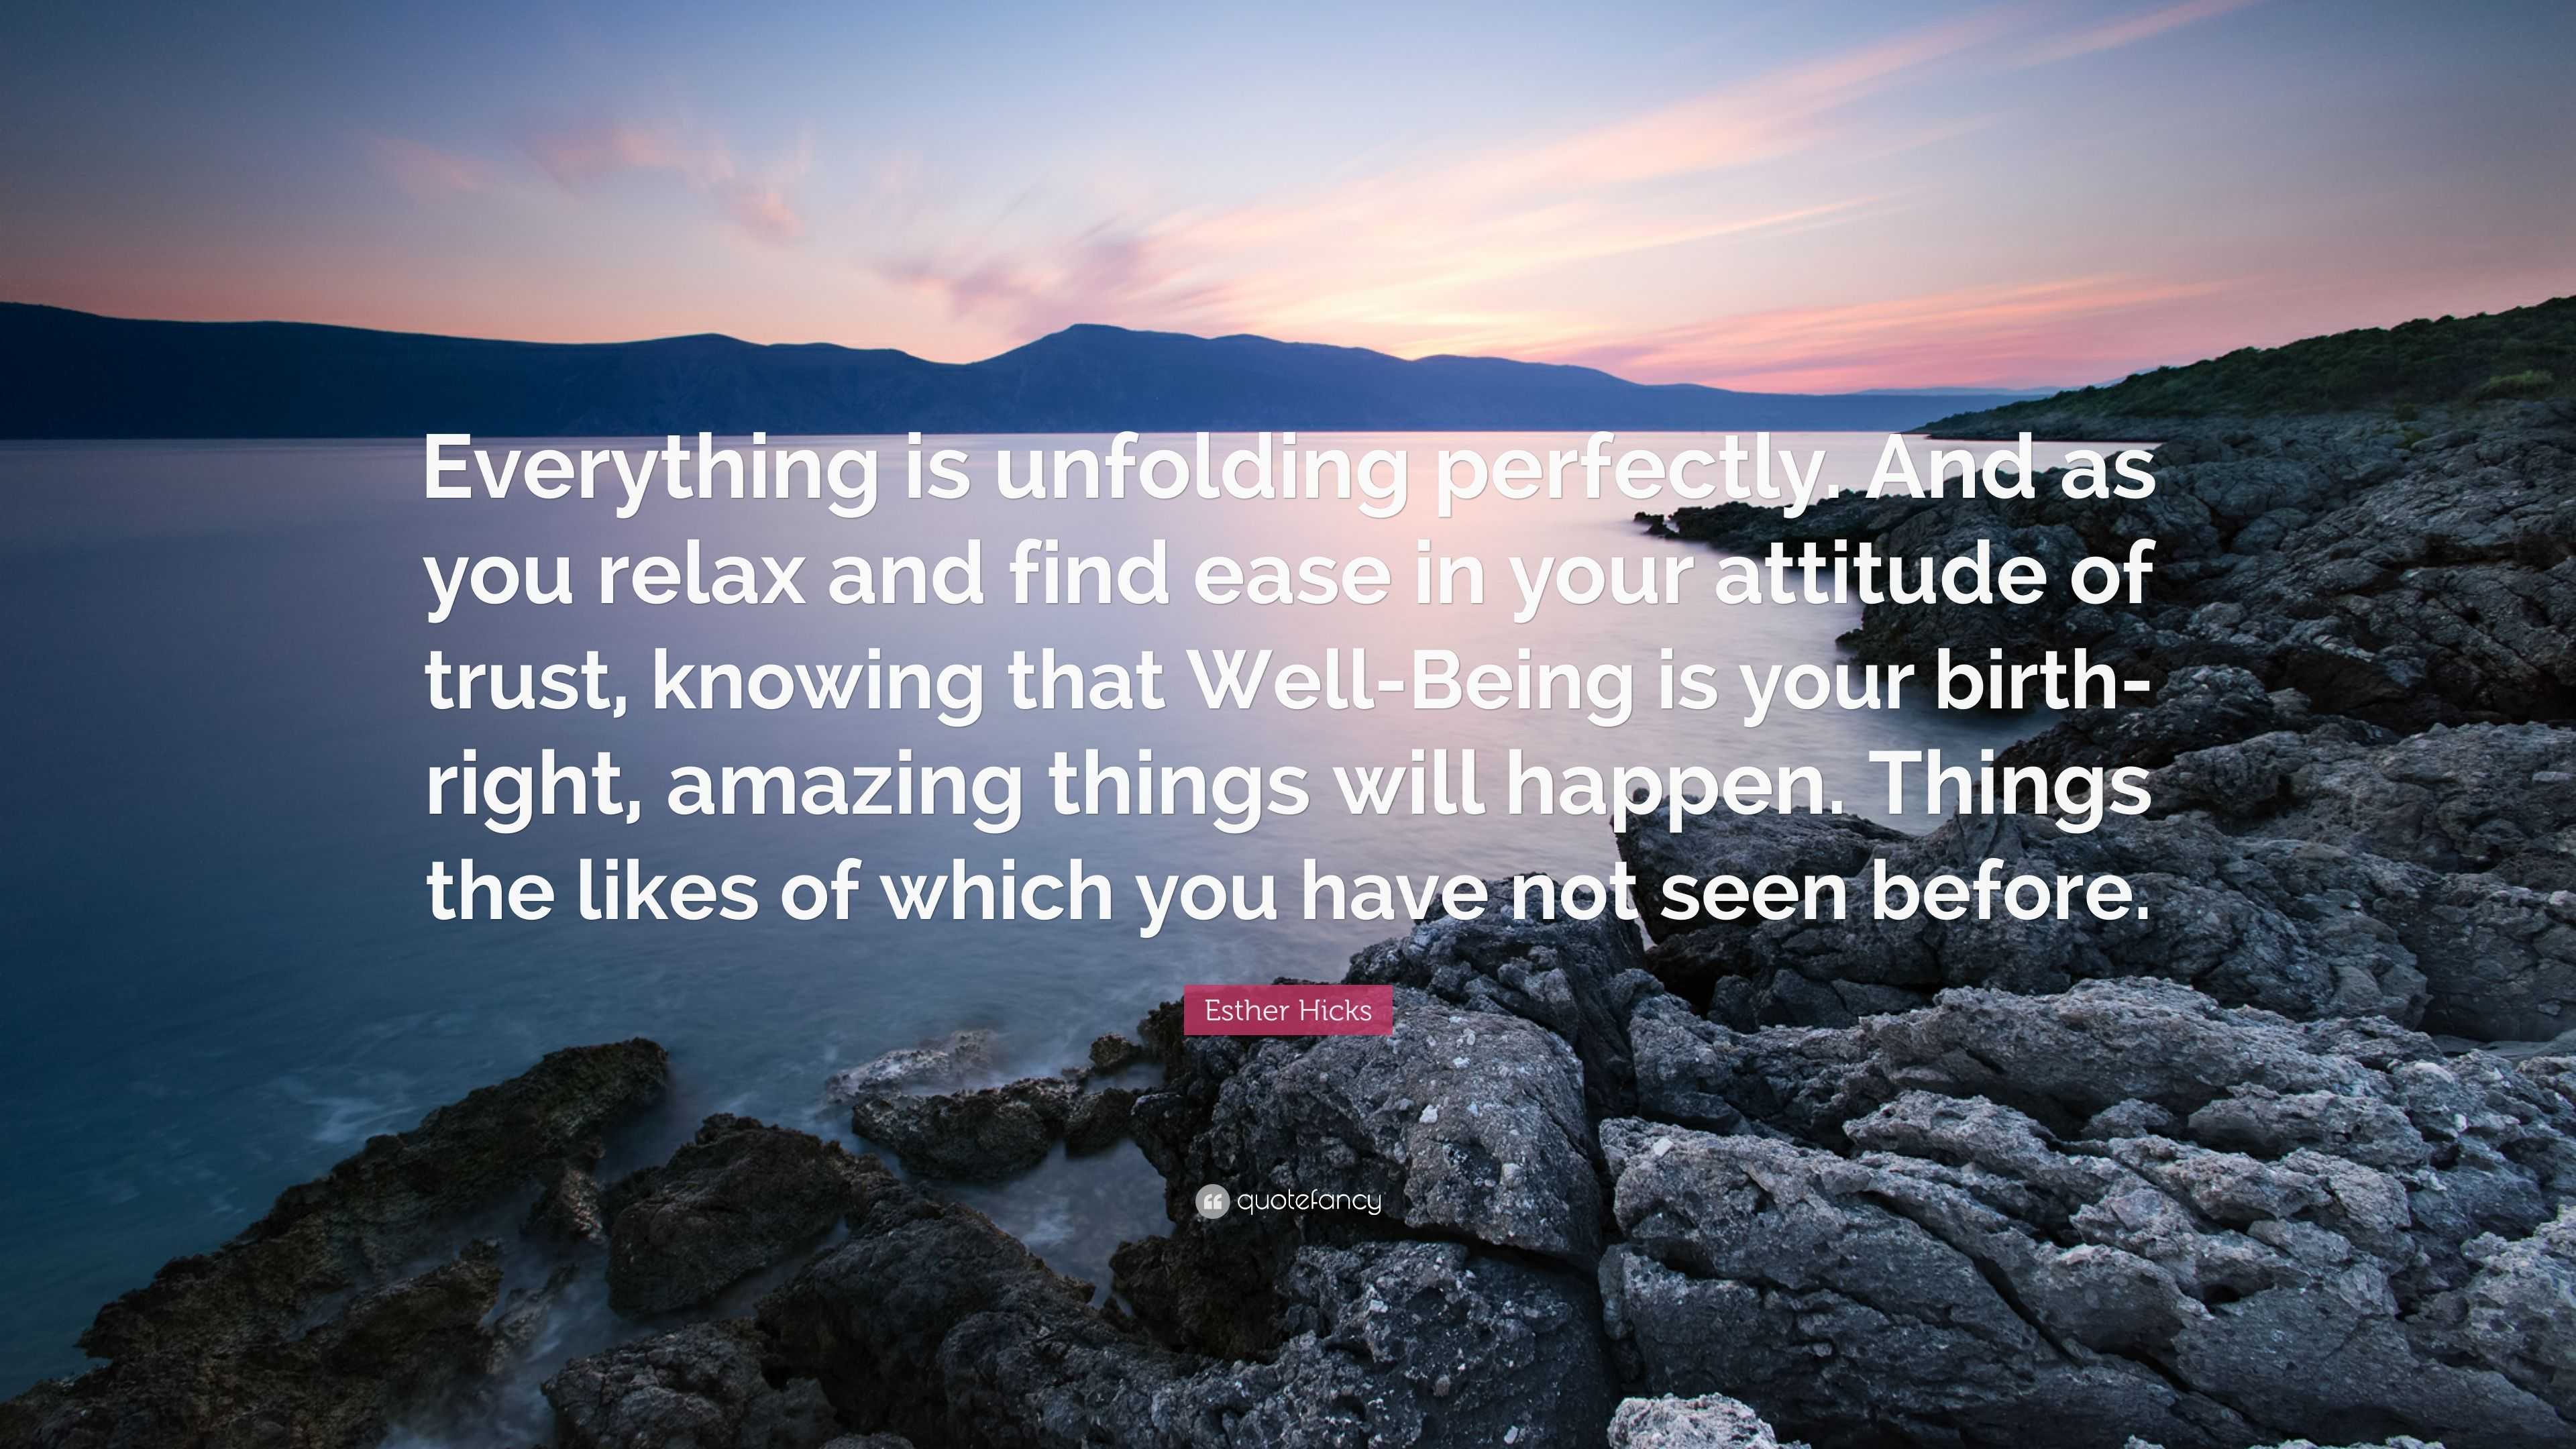 Esther Hicks Quote: “Everything is unfolding perfectly. And as you